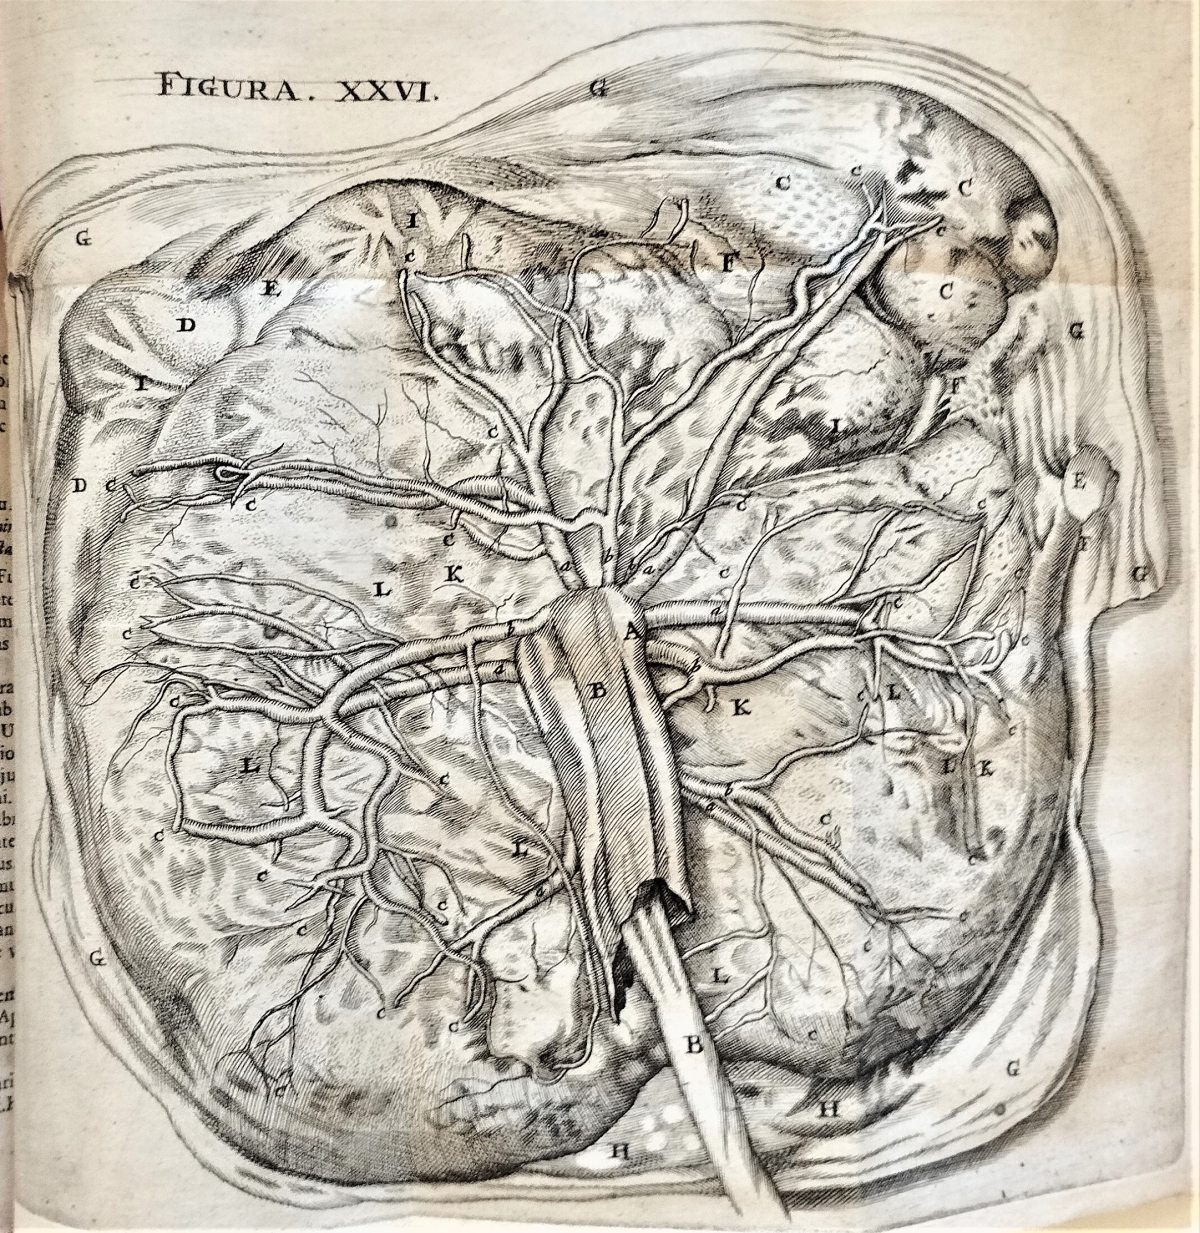 Engraved illustration of a placenta with canals and veins highlighted by different letters.